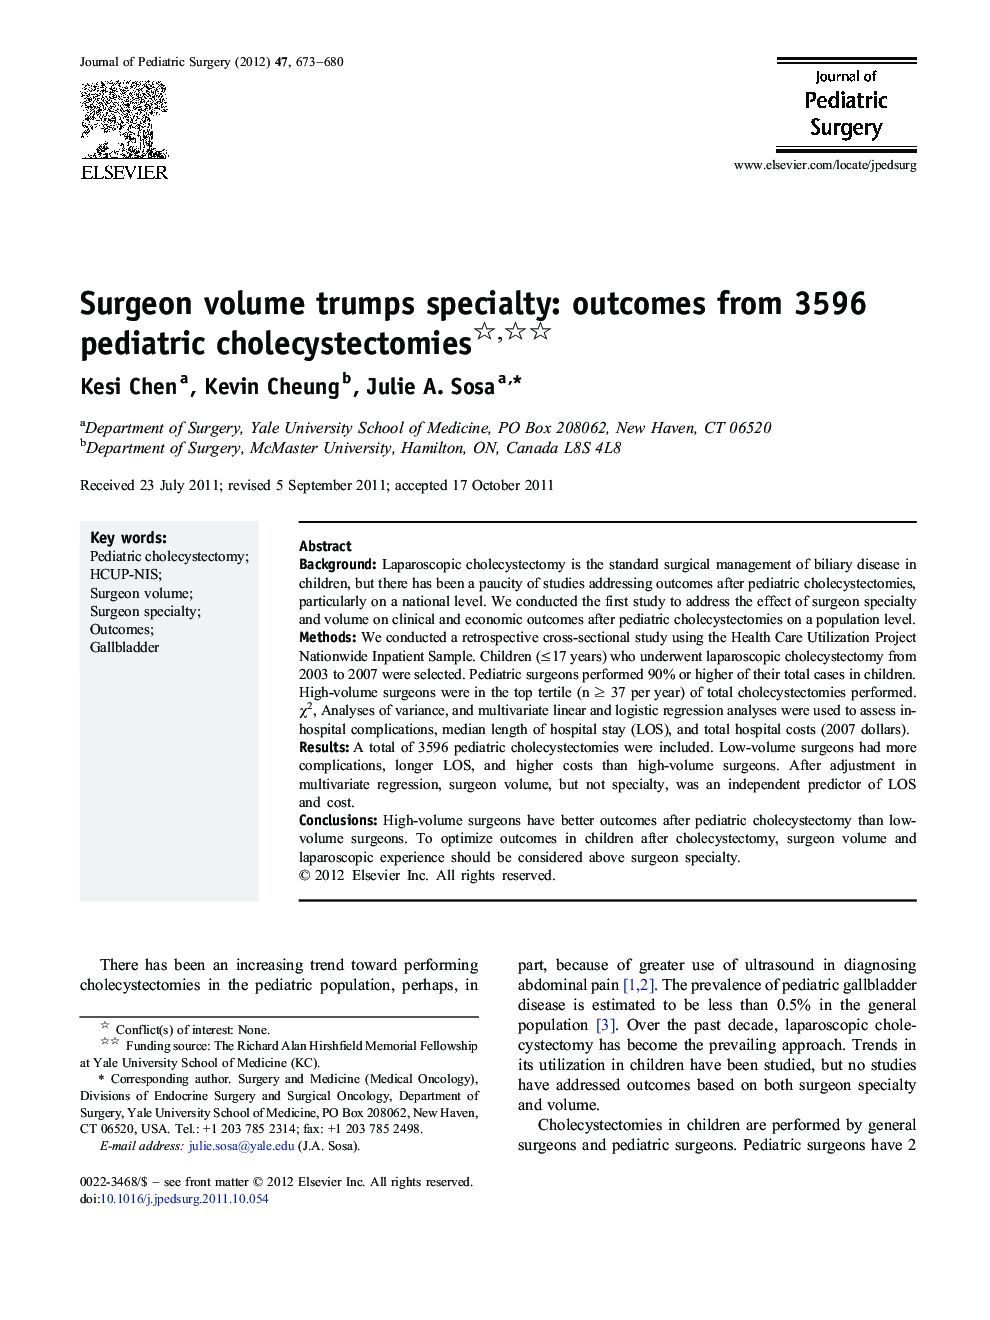 Surgeon volume trumps specialty: outcomes from 3596 pediatric cholecystectomies